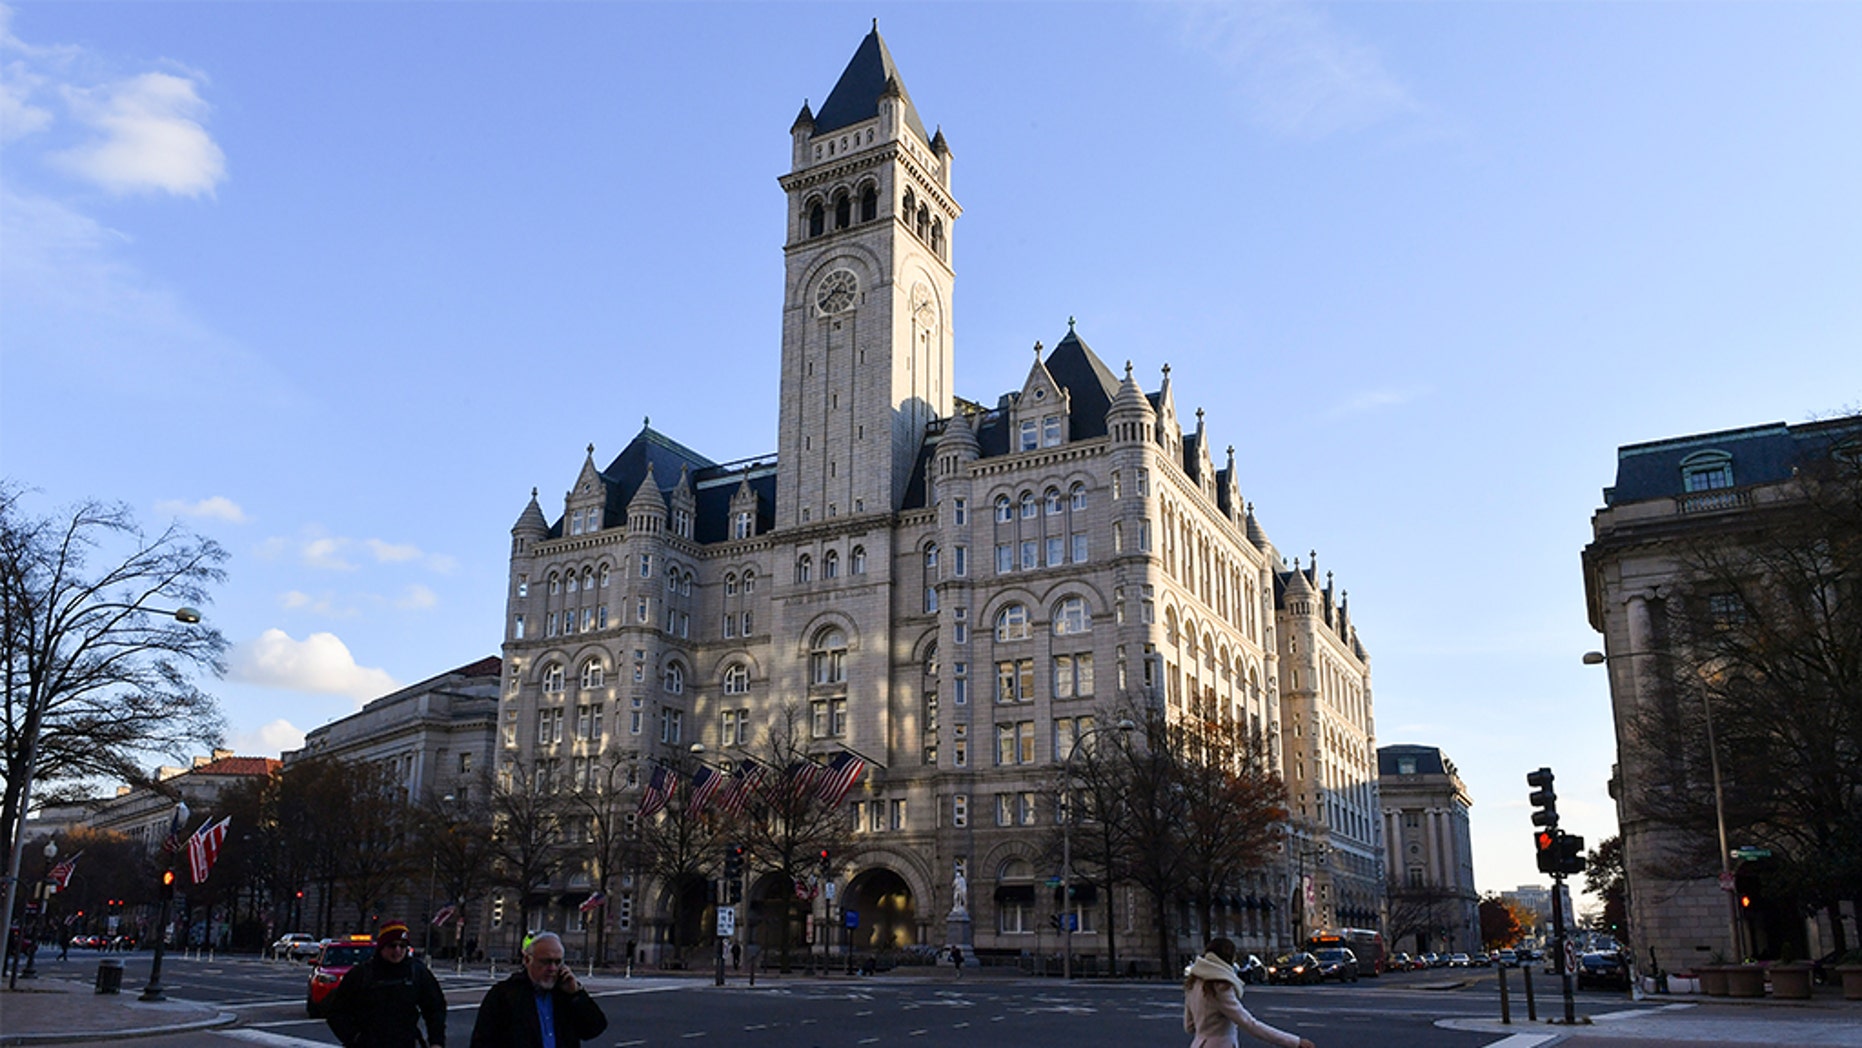 GSA sidestepped Constitution by allowing Trump hotel lease, report contends